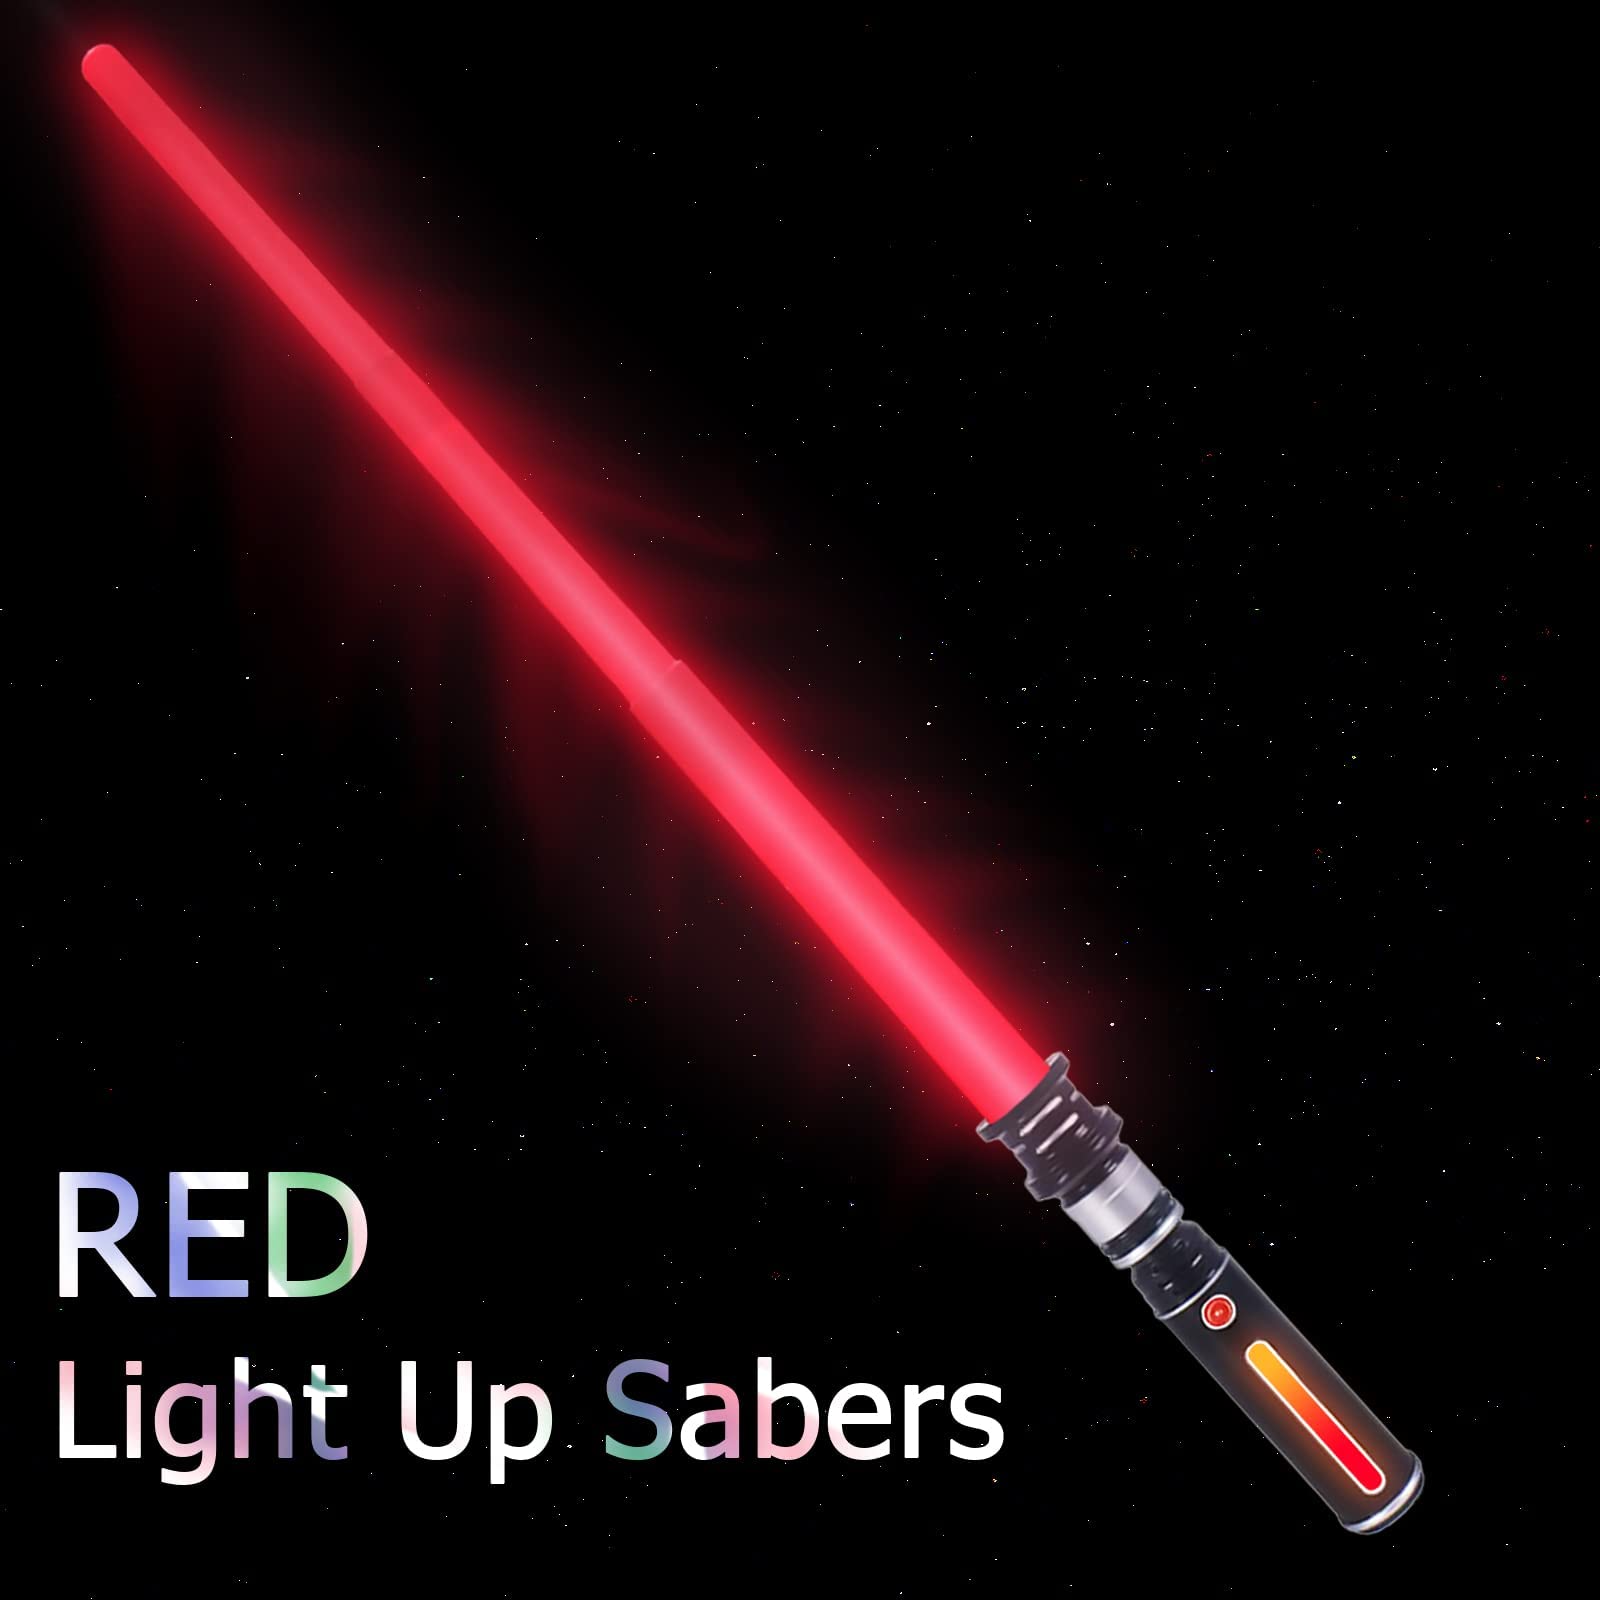 Lightup Saber for Kids LED FX Light Swords, Expandable Lightup Sabers with Sound and Glowing Handle, Light Up Sword for Kids, Christmas Parties Costume, Galaxy War Fighters